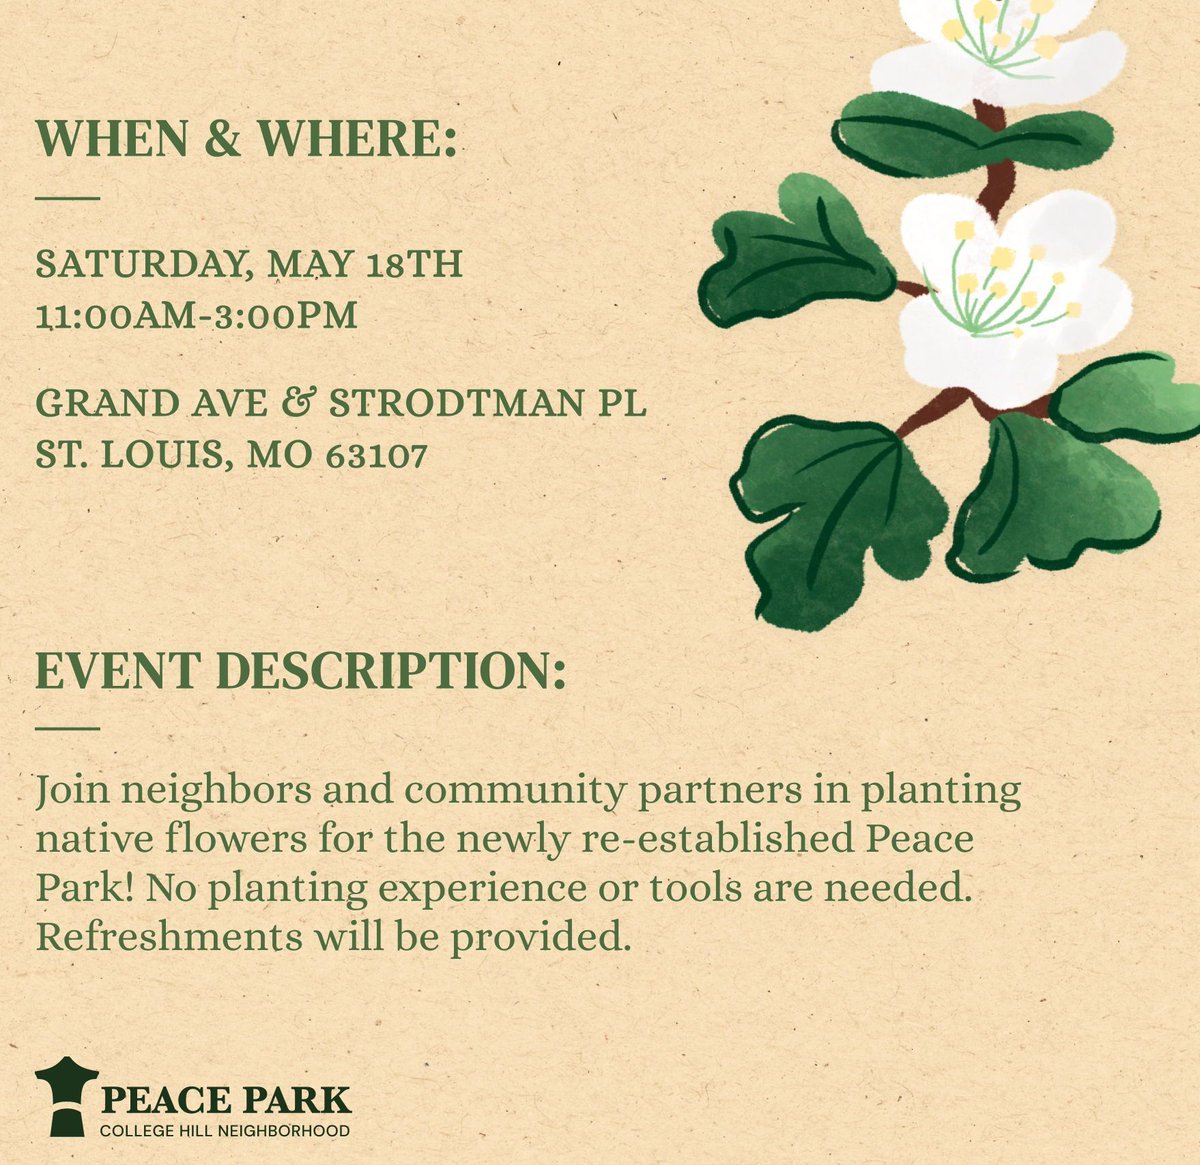 🌼 The Green City Coalition is having a Planting Blitz at Peace Park this Saturday and we are helping spread the word! This Saturday, May 18 9:00 am - 3:00 pm Please RSVP if you would like to volunteer ~> buff.ly/3JRJajh